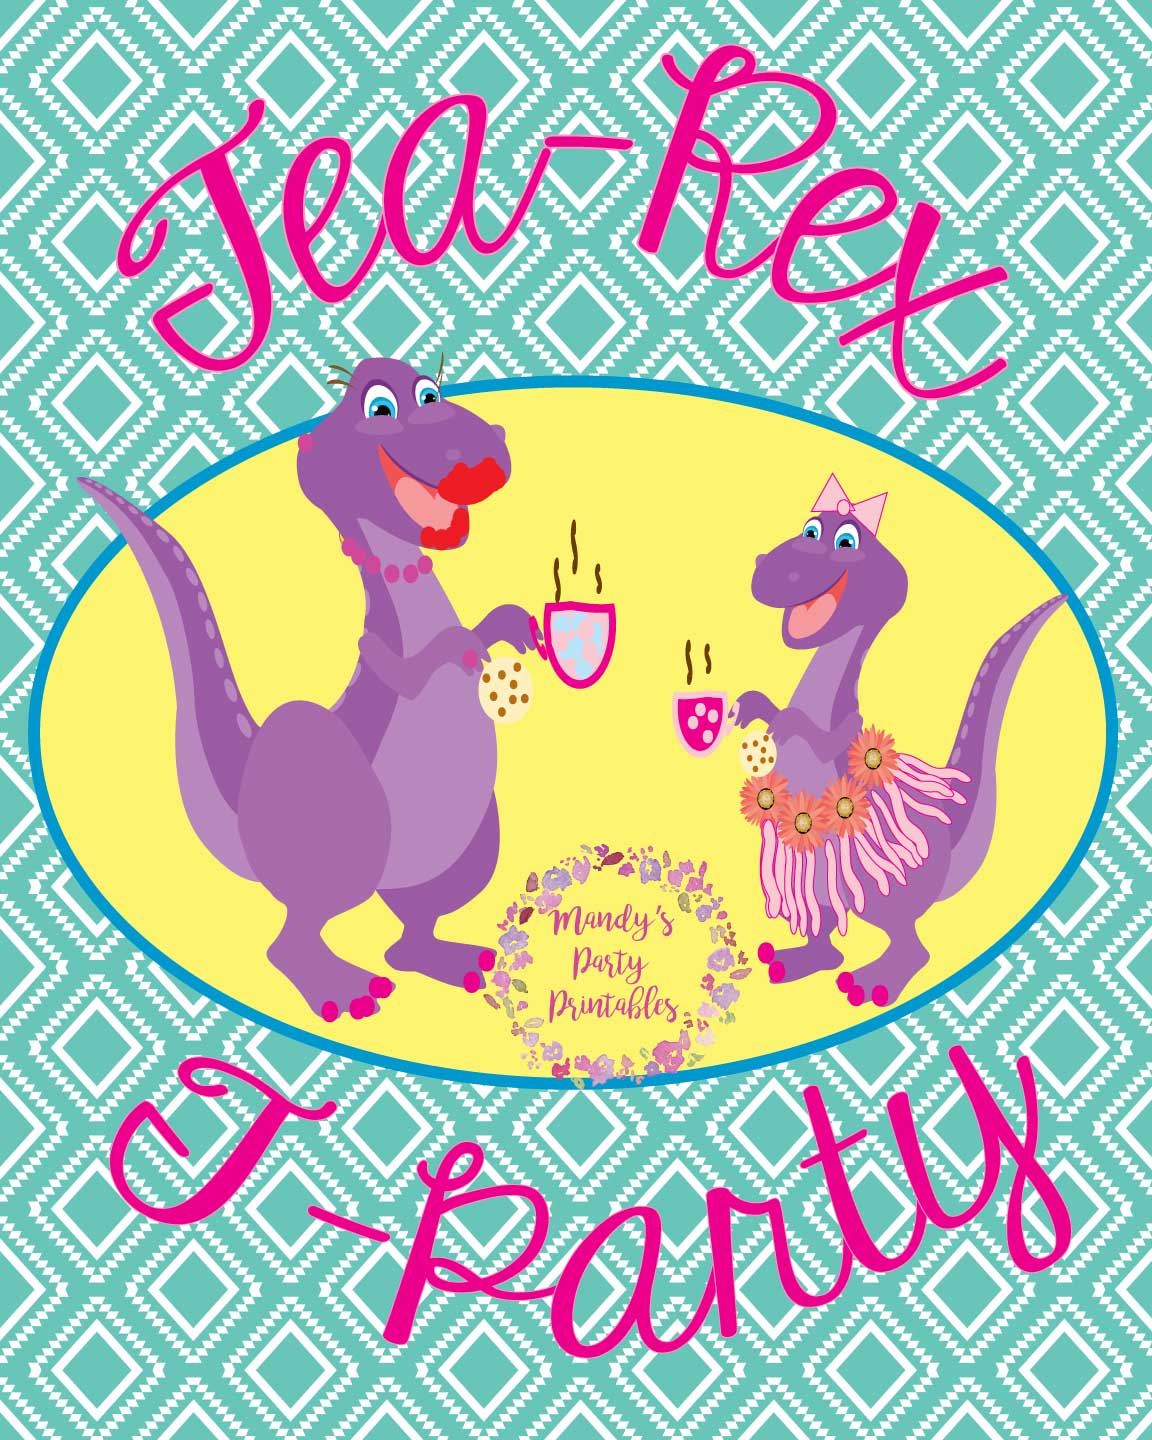 Party sign from Girly Tea Rex T-Party at Mandy's Party Printables